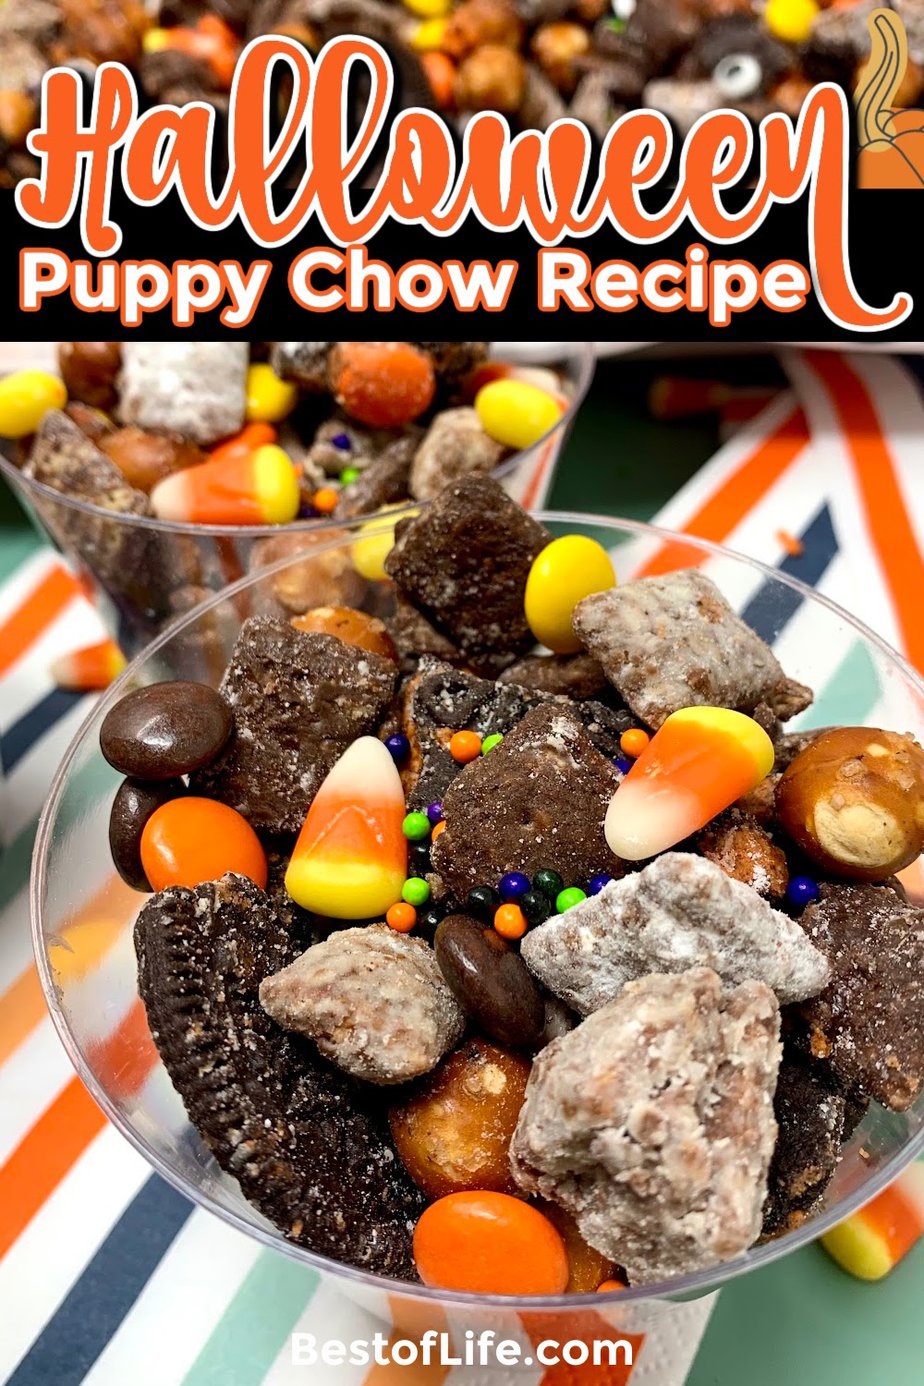 Make this Halloween puppy chow recipe for a fun and festive Halloween party recipe that both kids and adults will enjoy! Halloween Party Recipes | Halloween Snack Recipes | Recipes to Make with Kids | Snack Recipes for Fall | Fall Treat Recipes | Halloween Puppy Chow Chex Mix Recipe | Check Mix Snack Ideas | Halloween Party Ideas | Halloween Recipes for Kids | Fun Recipes for Halloween #halloweenrecipes #puppychow via @thebestoflife